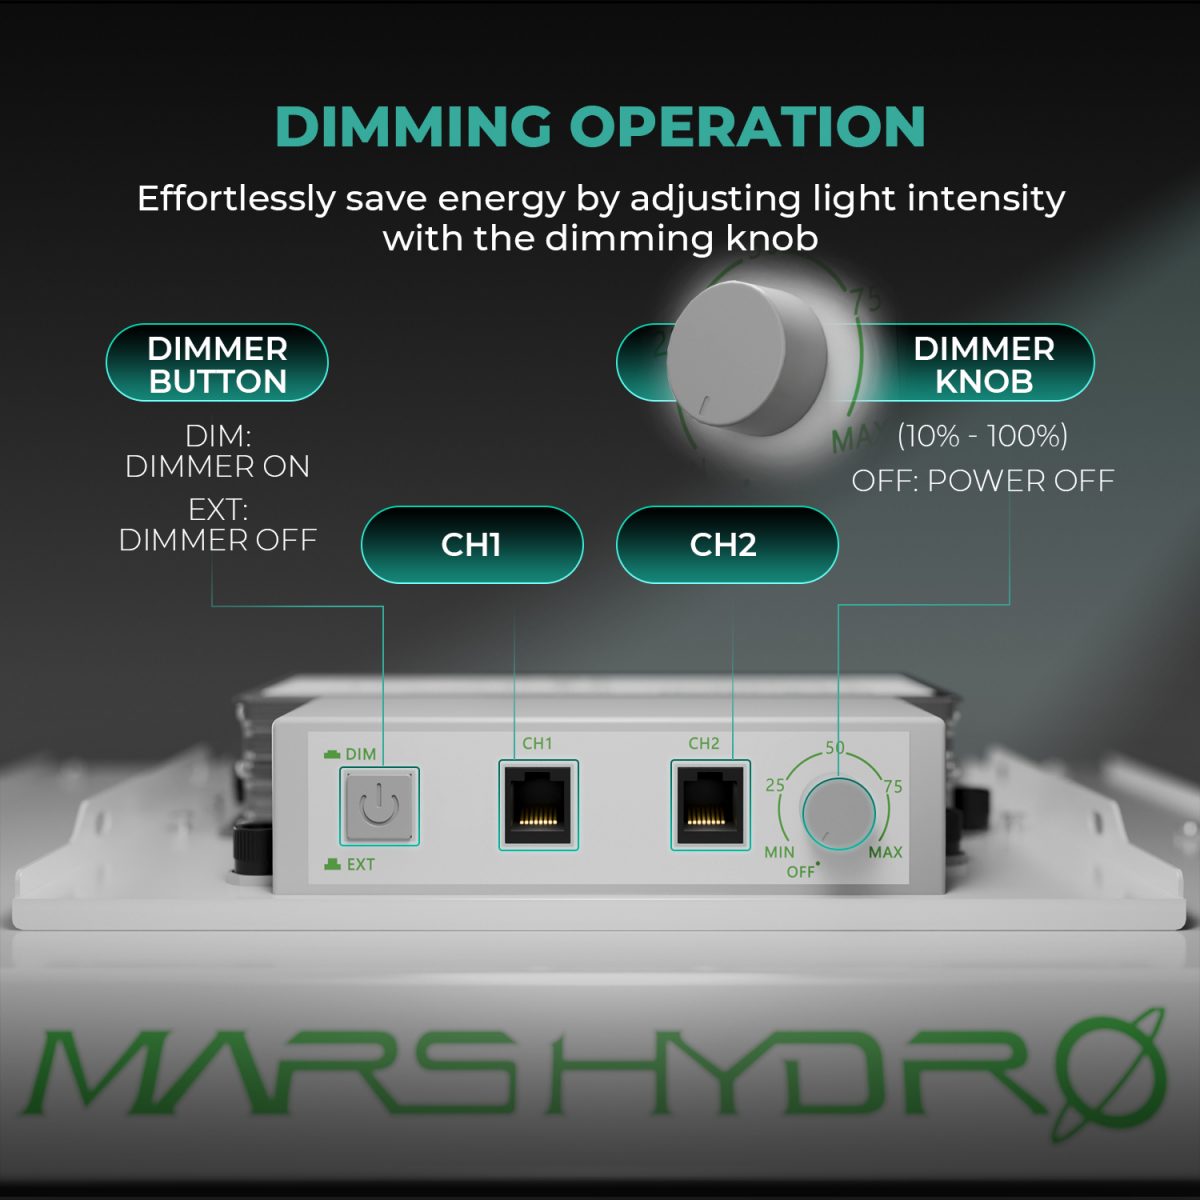 Mars HydroTS3000 DIMMING OPERATIONE ffortlessly save energy by adjusting